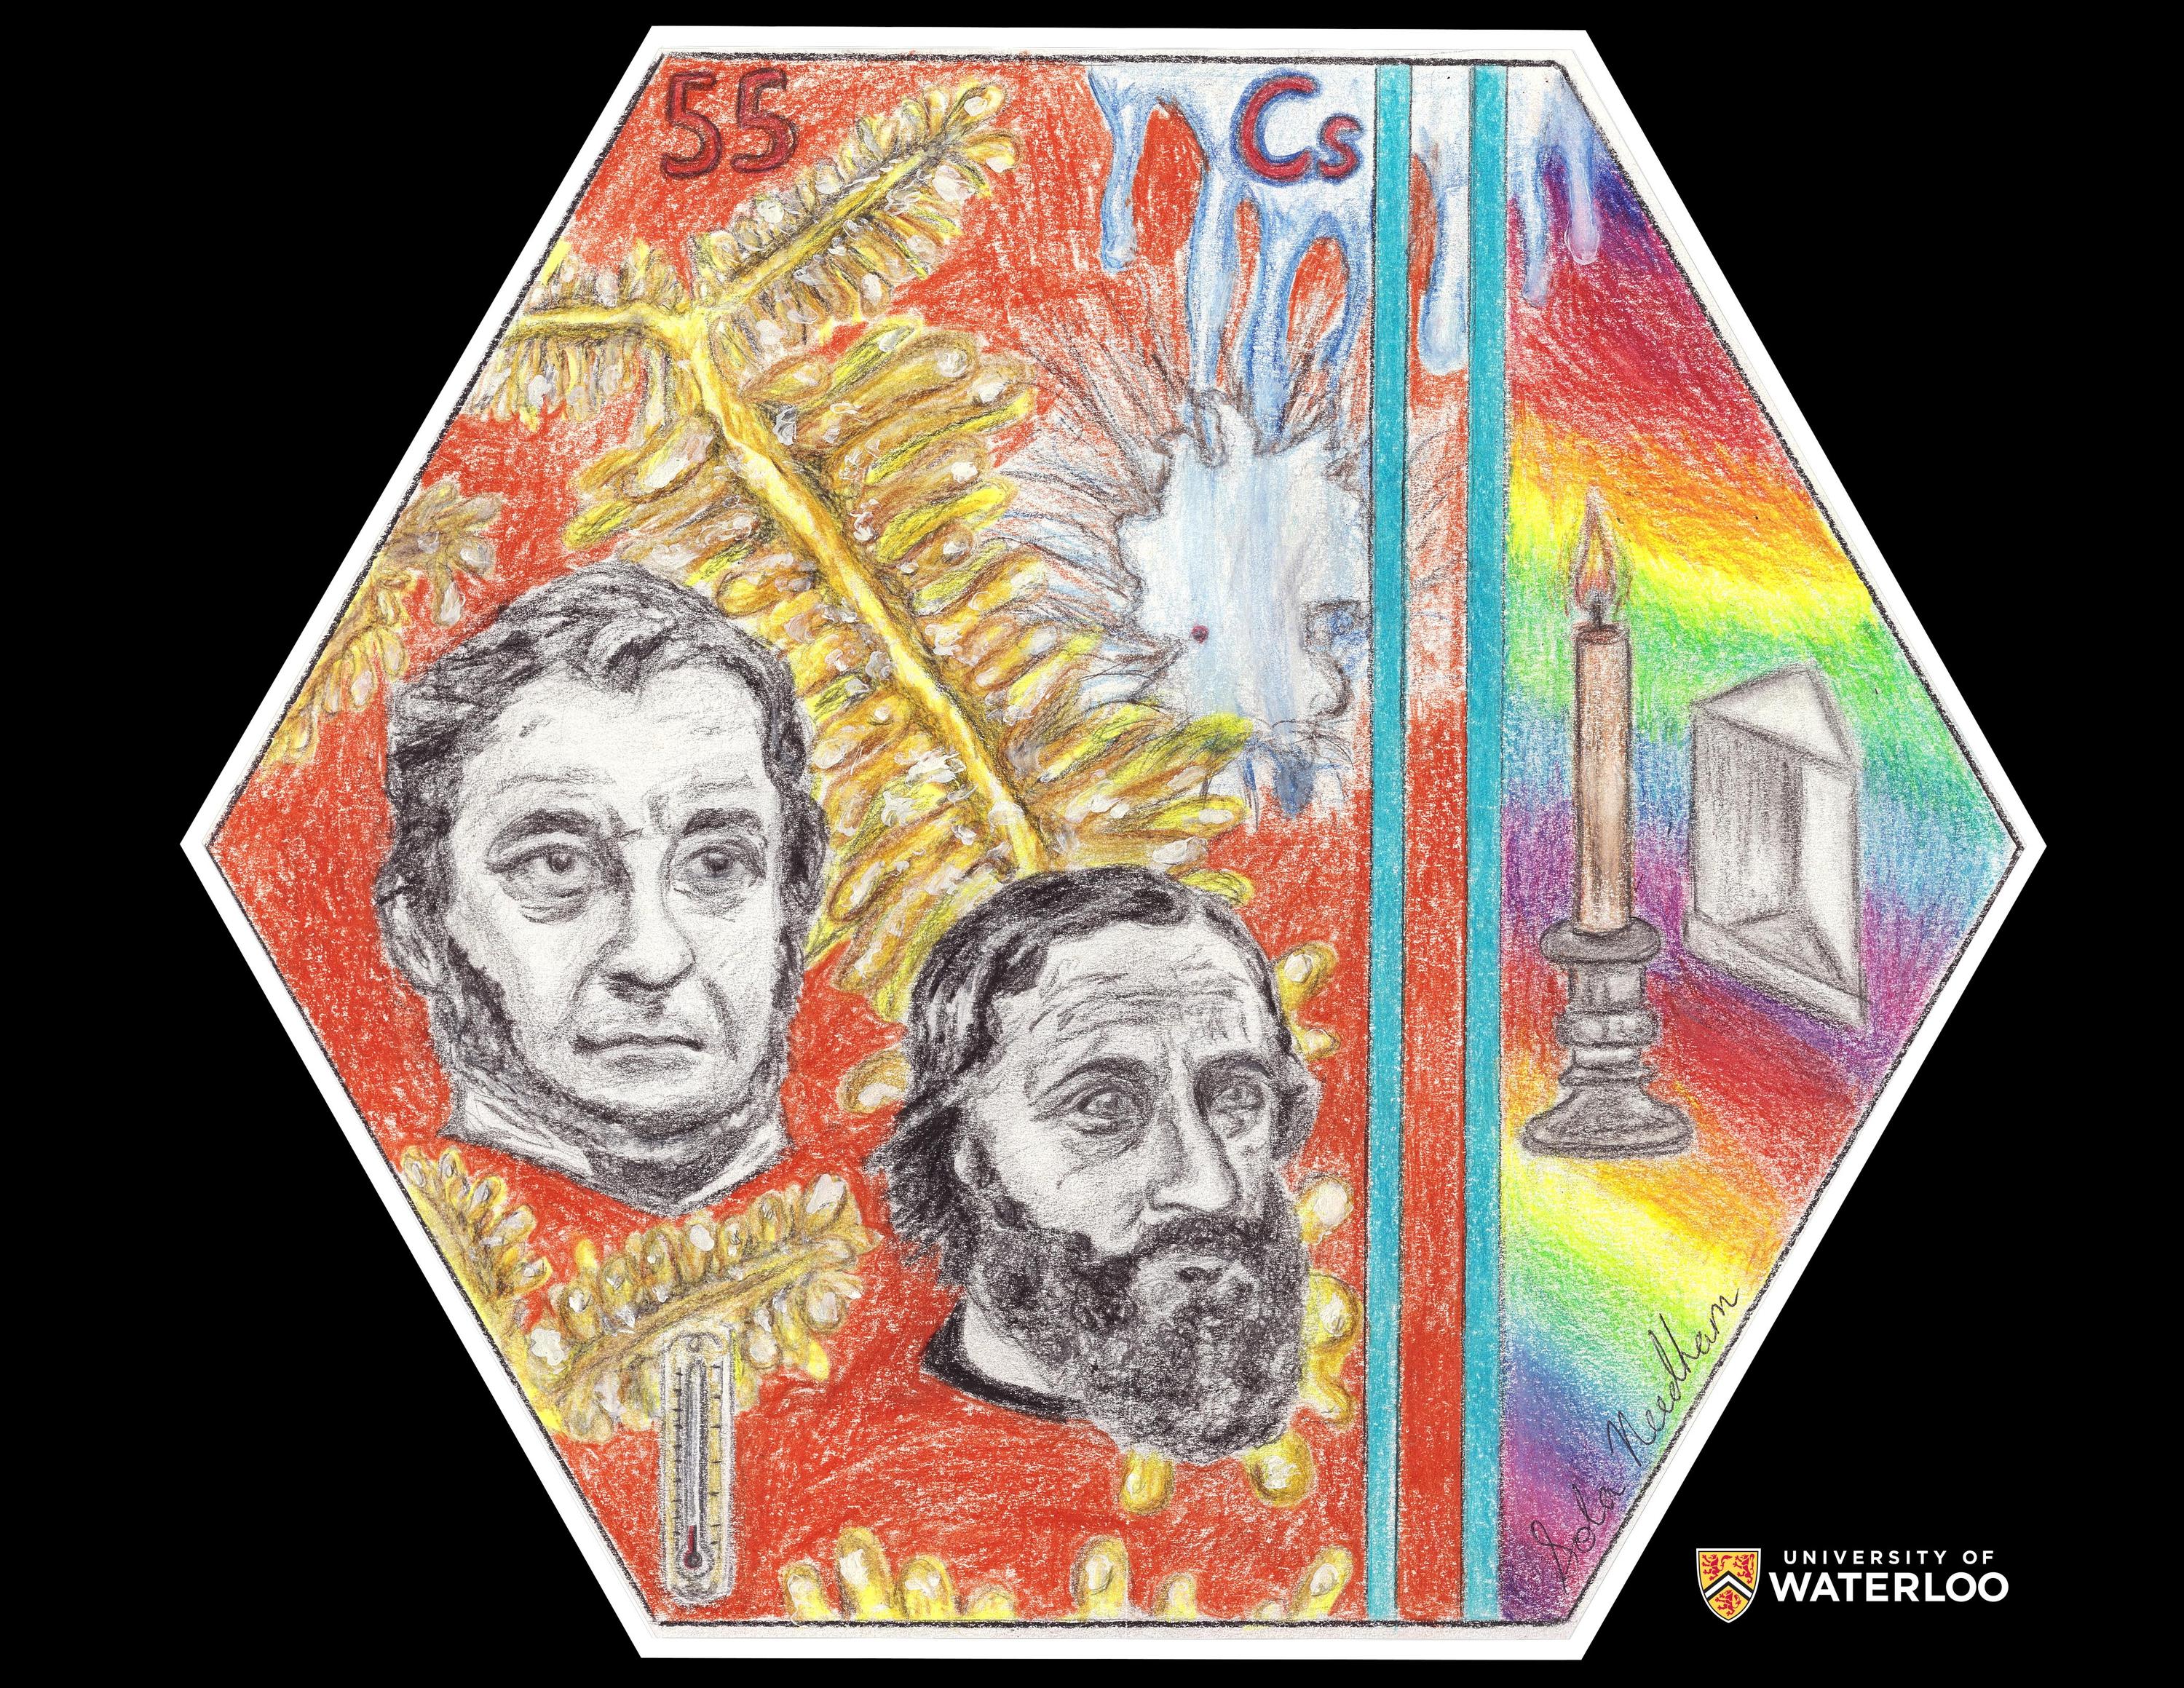 Coloured pencil on paper. Central are Robert Bunsen and Gustav Kirchhoff. Behind them is cesium in its semi-solid crystal form. Water drips from above and creates an explosion the shape of Germany with Heidelberg marked. Bottom left is a thermometer showing a low temperature. To the right are two blue vertical lines that bleed to an image of a rainbow spectrum, candle and prism. Above is the chemical symbol “Cs” and atomic number “55”.